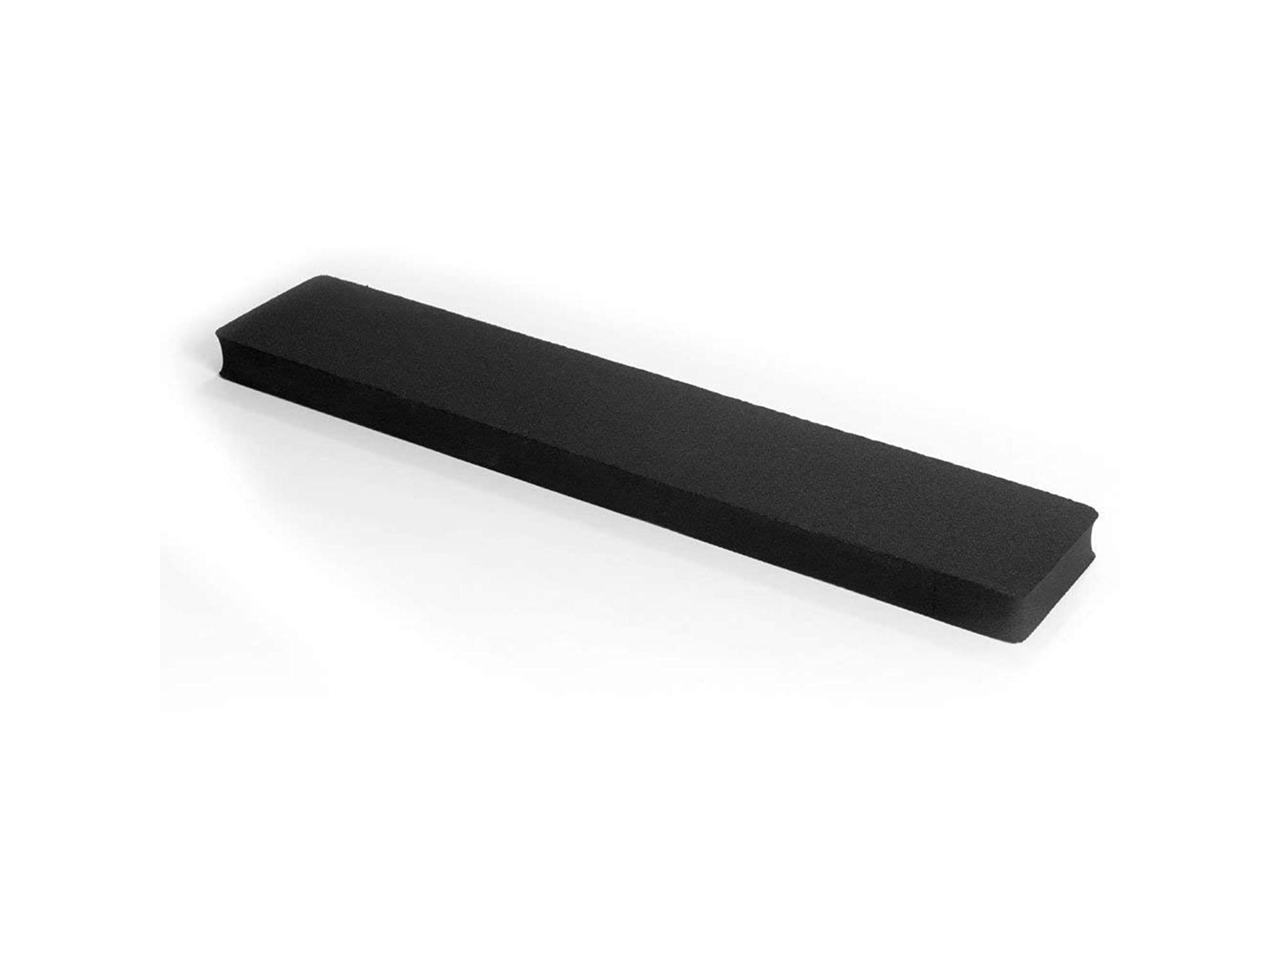 Grifiti Fat Wrist Pad 14 x 2.75 x 0.75 Inch Black is a Thinner Wrist Rest for 10keyless Keyboards and Mechanical Keyboards Black Nylon Surface 